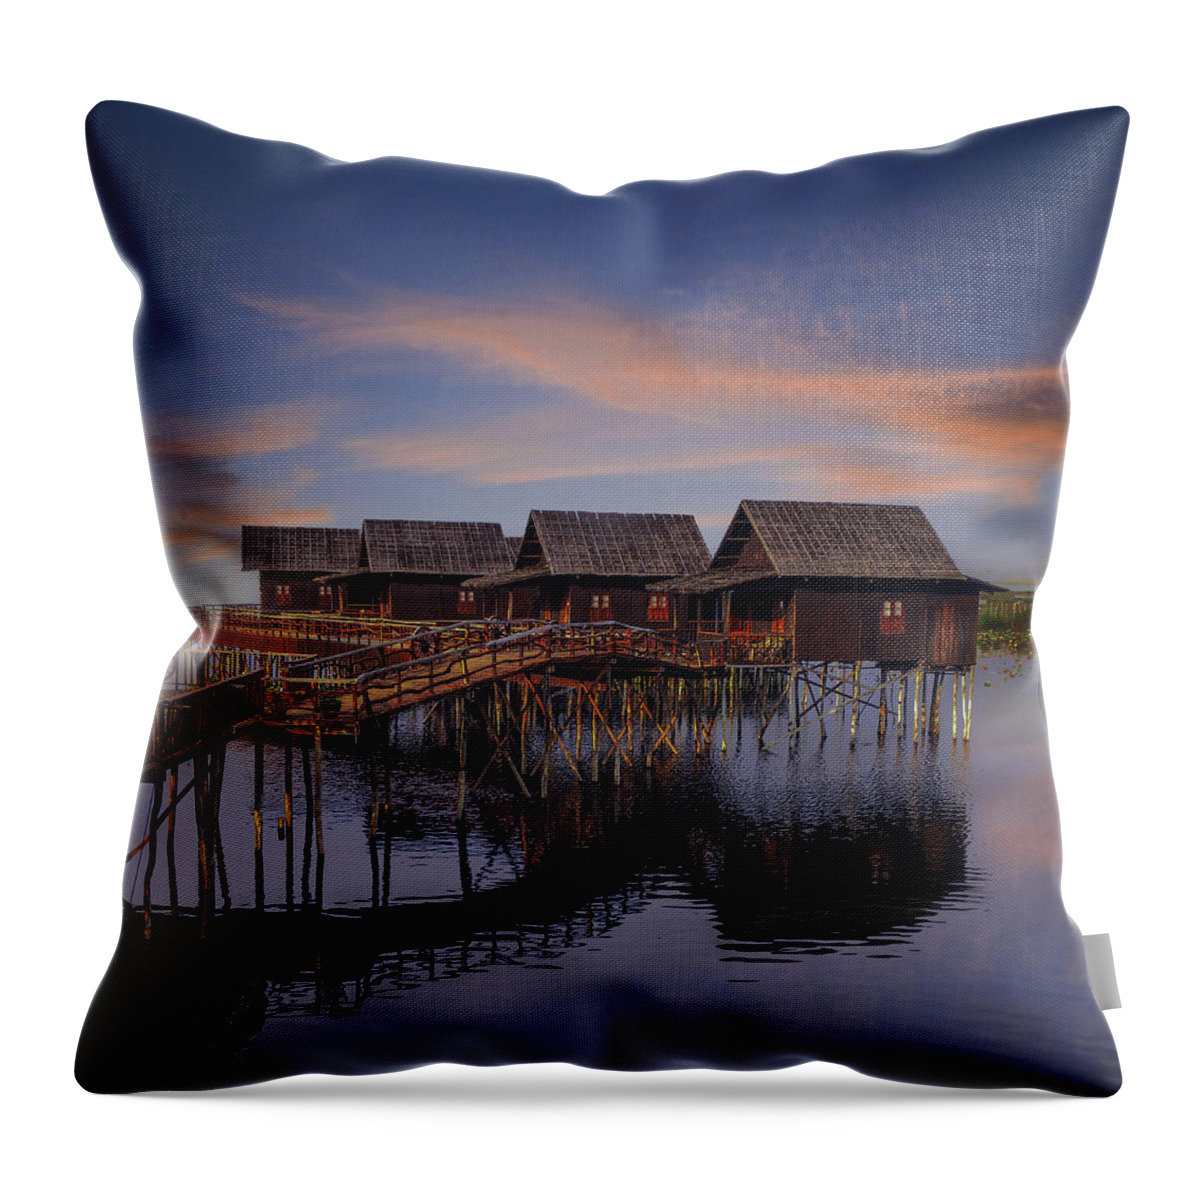 Tranquility Throw Pillow featuring the photograph Twilight On The Lake by Amateur Photographer, Still Learning...